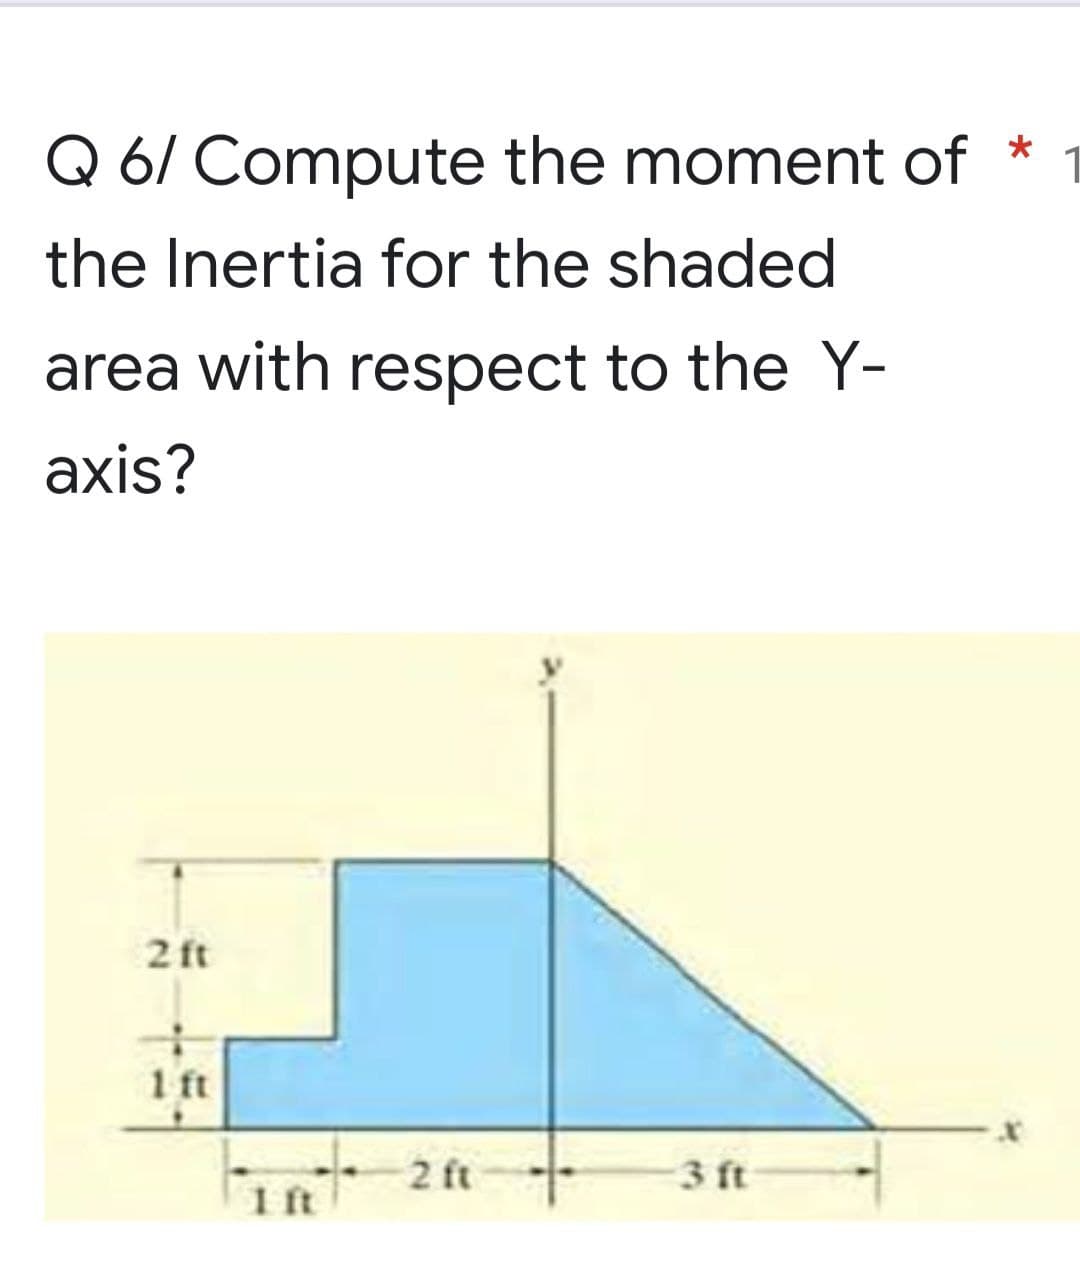 Q 6/ Compute the moment of *
the Inertia for the shaded
area with respect to the Y-
axis?
2 ft
1 ft
3 ft
1 ft
2 ft